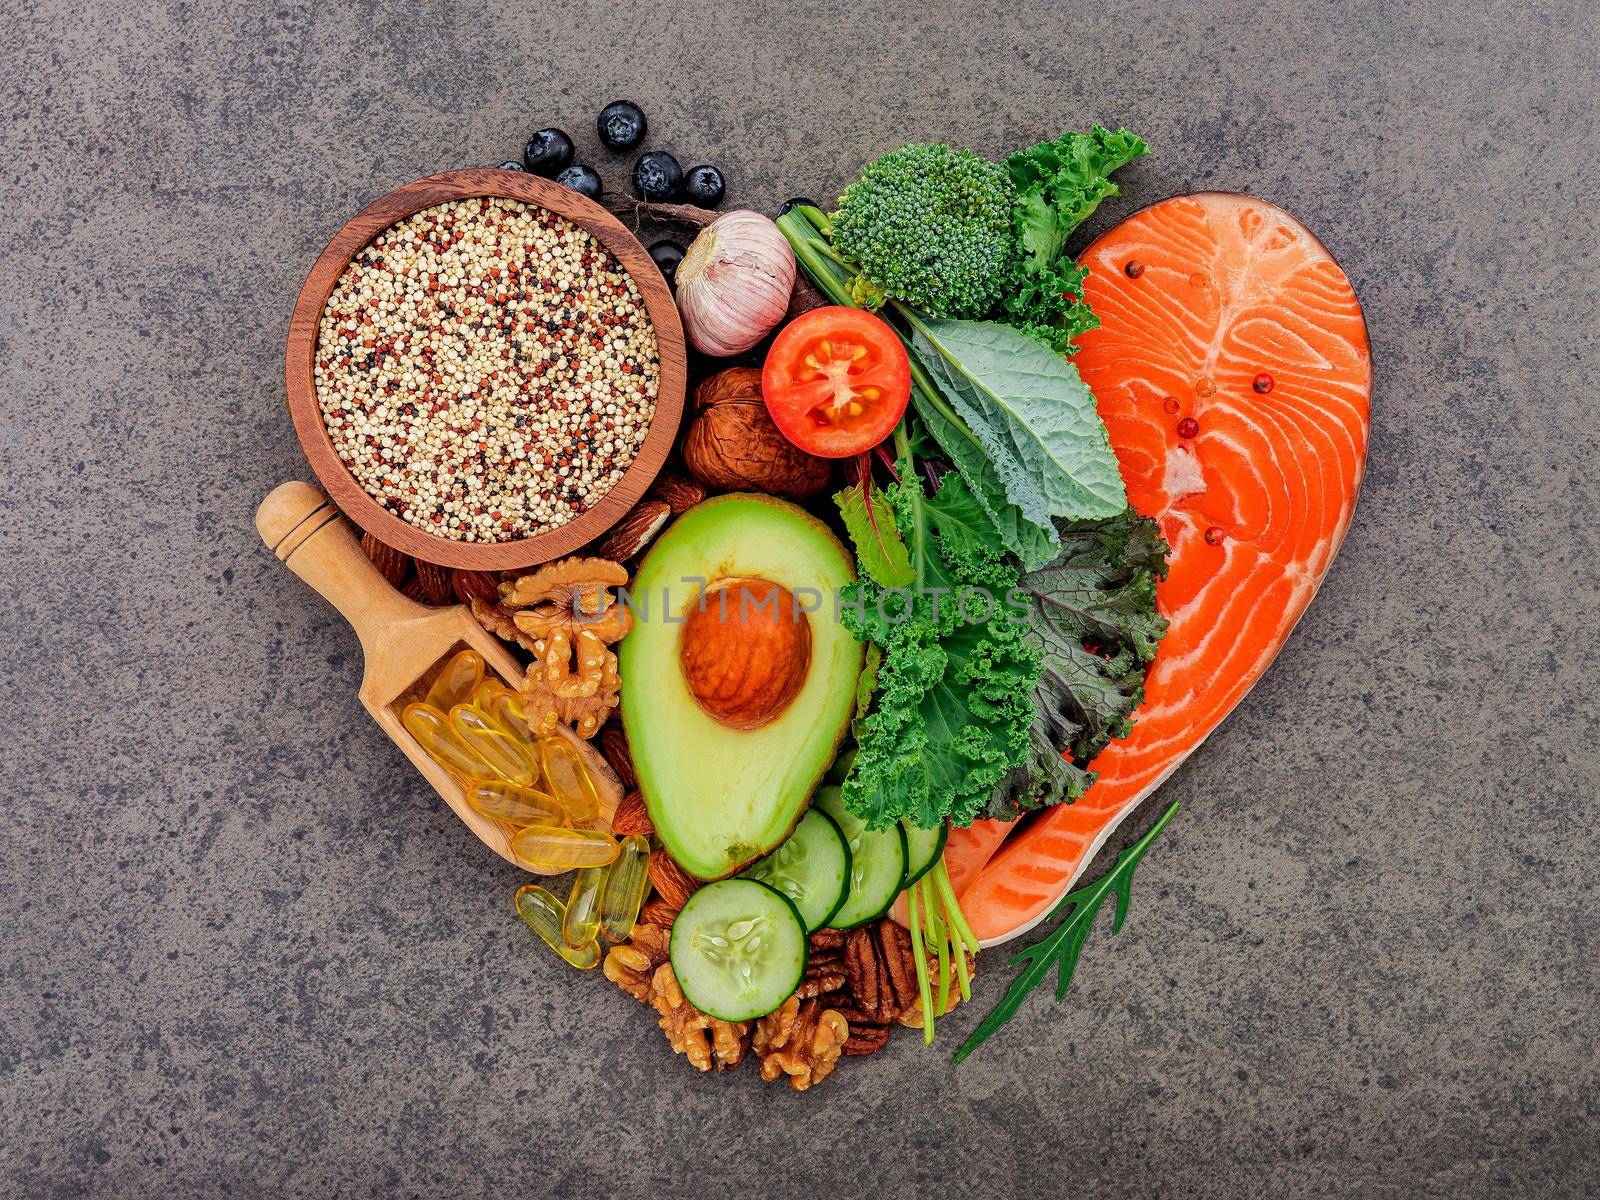 Heart shape of ketogenic low carbs diet concept. Ingredients for healthy foods selection on dark stone background.